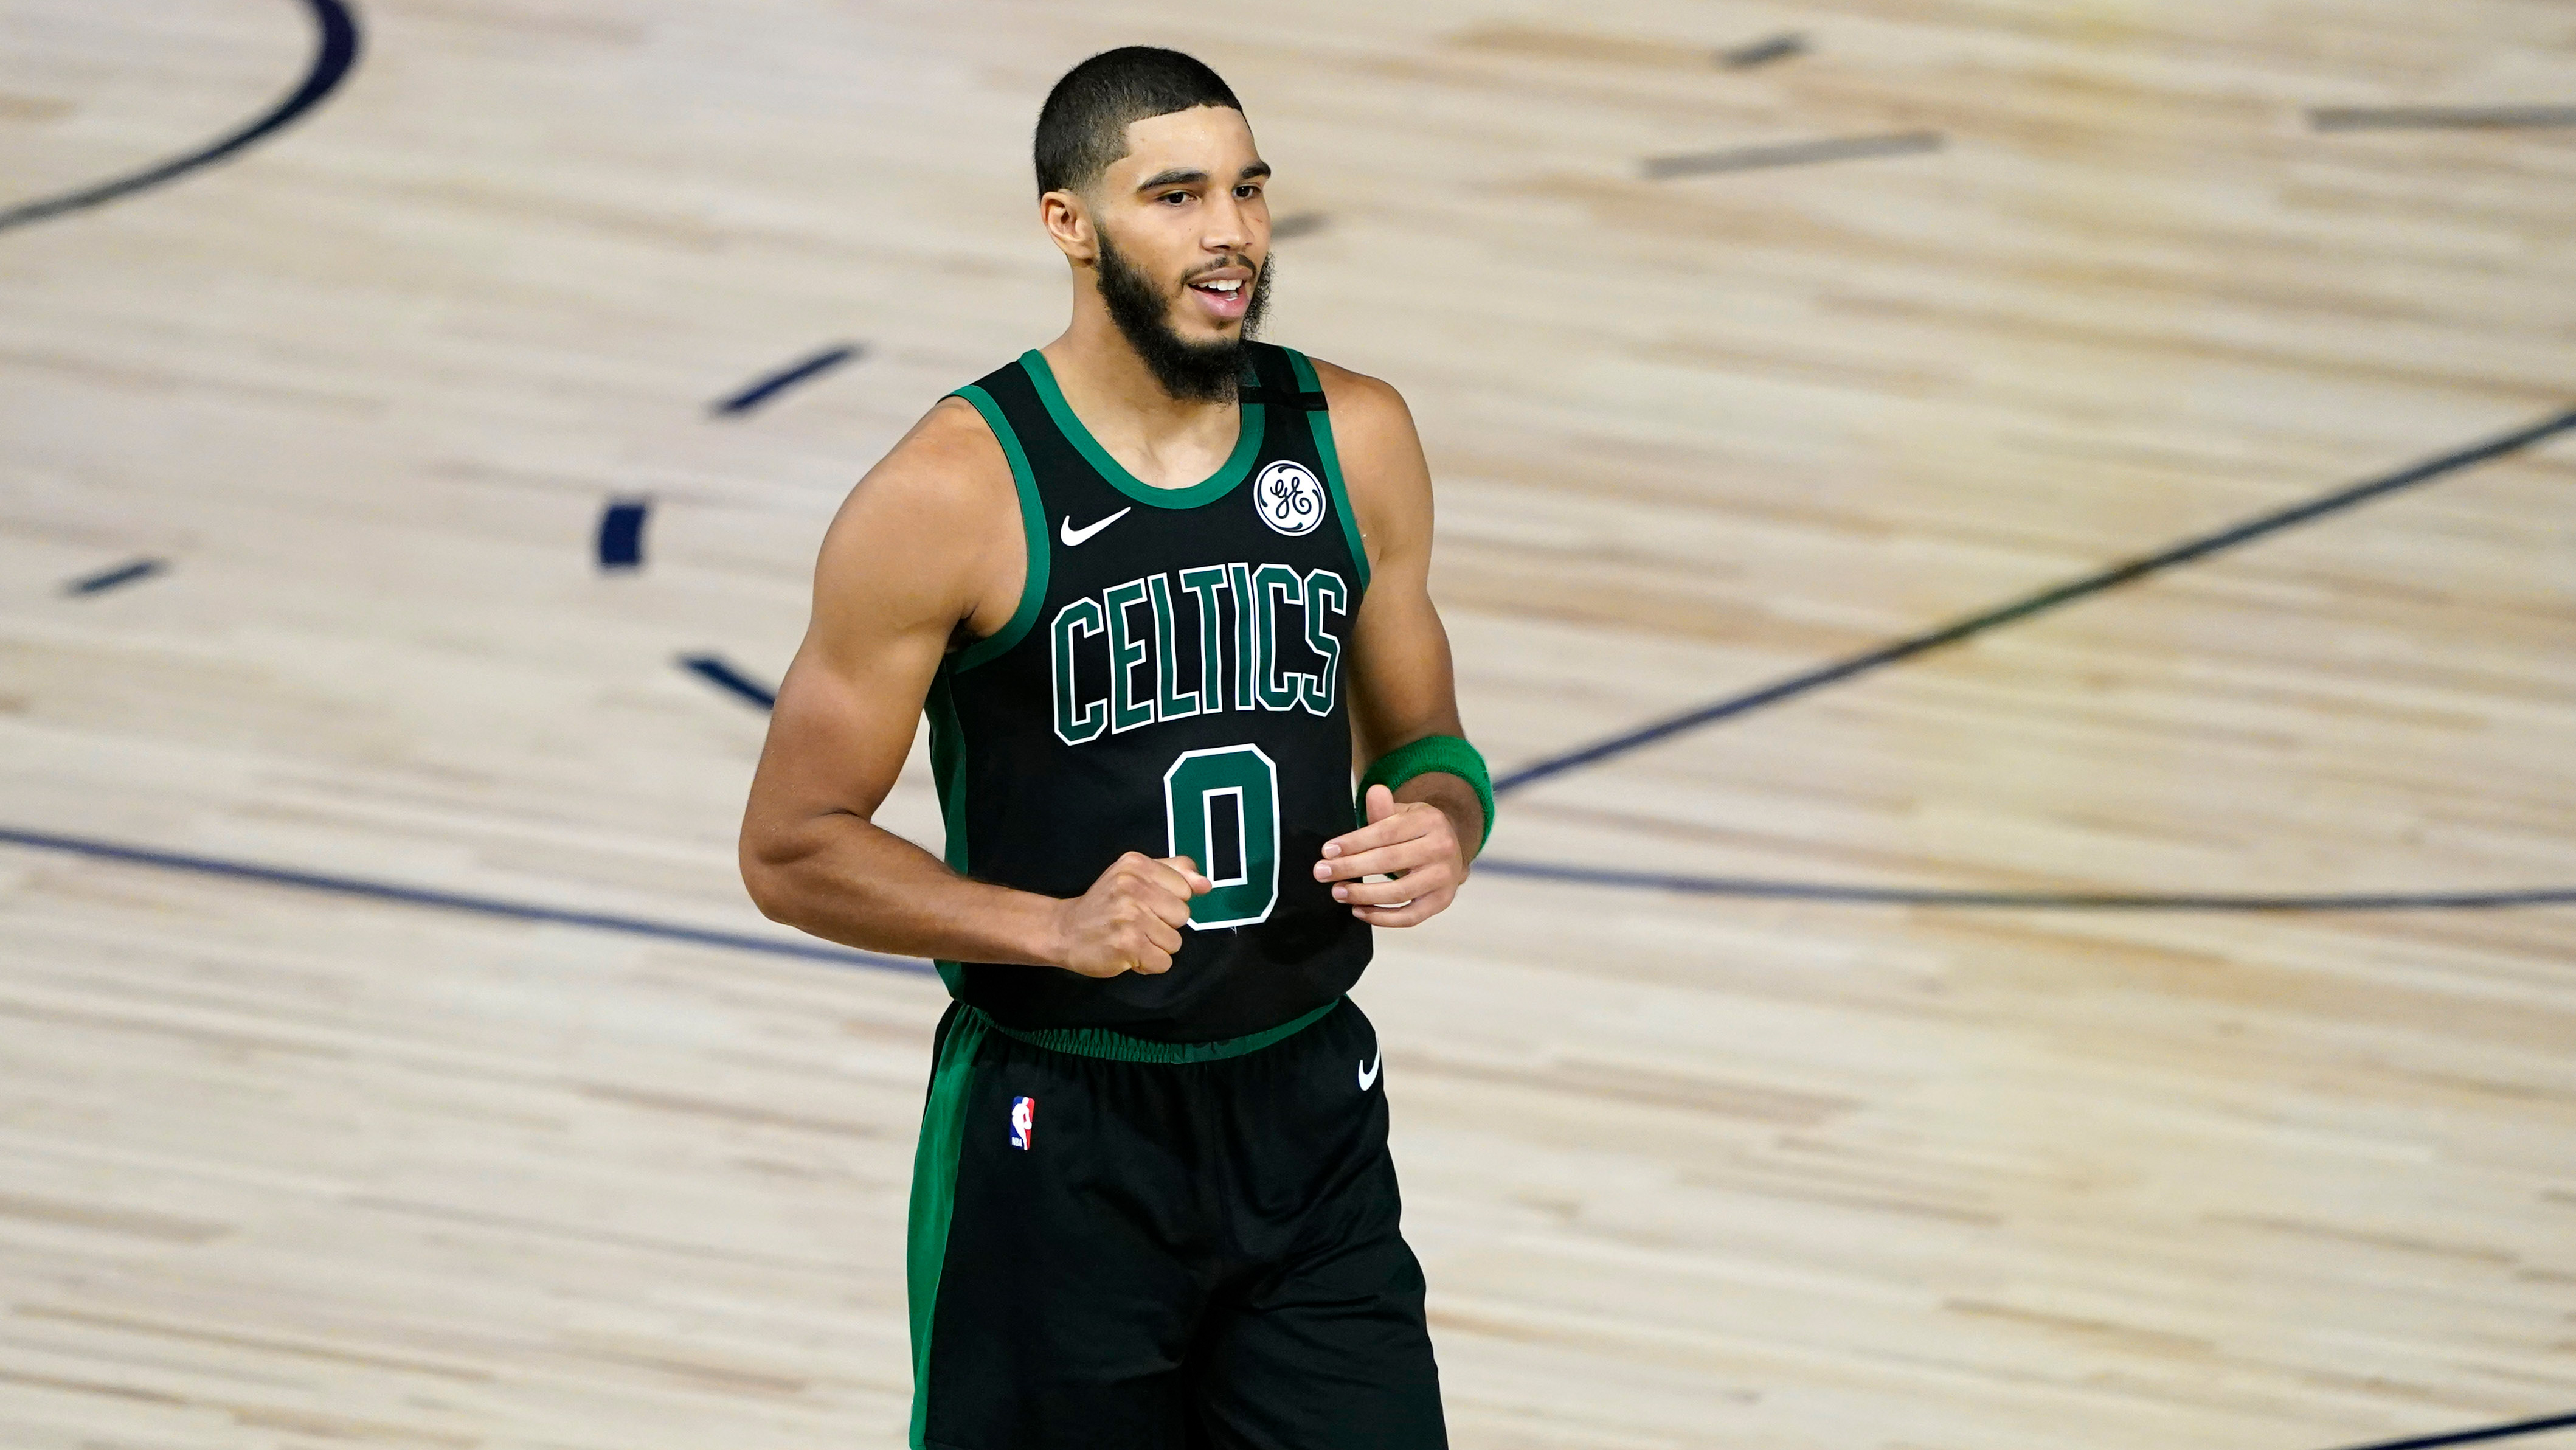 Jayson Tatum Is Only 21, but He's Still the Key to Boston's Future